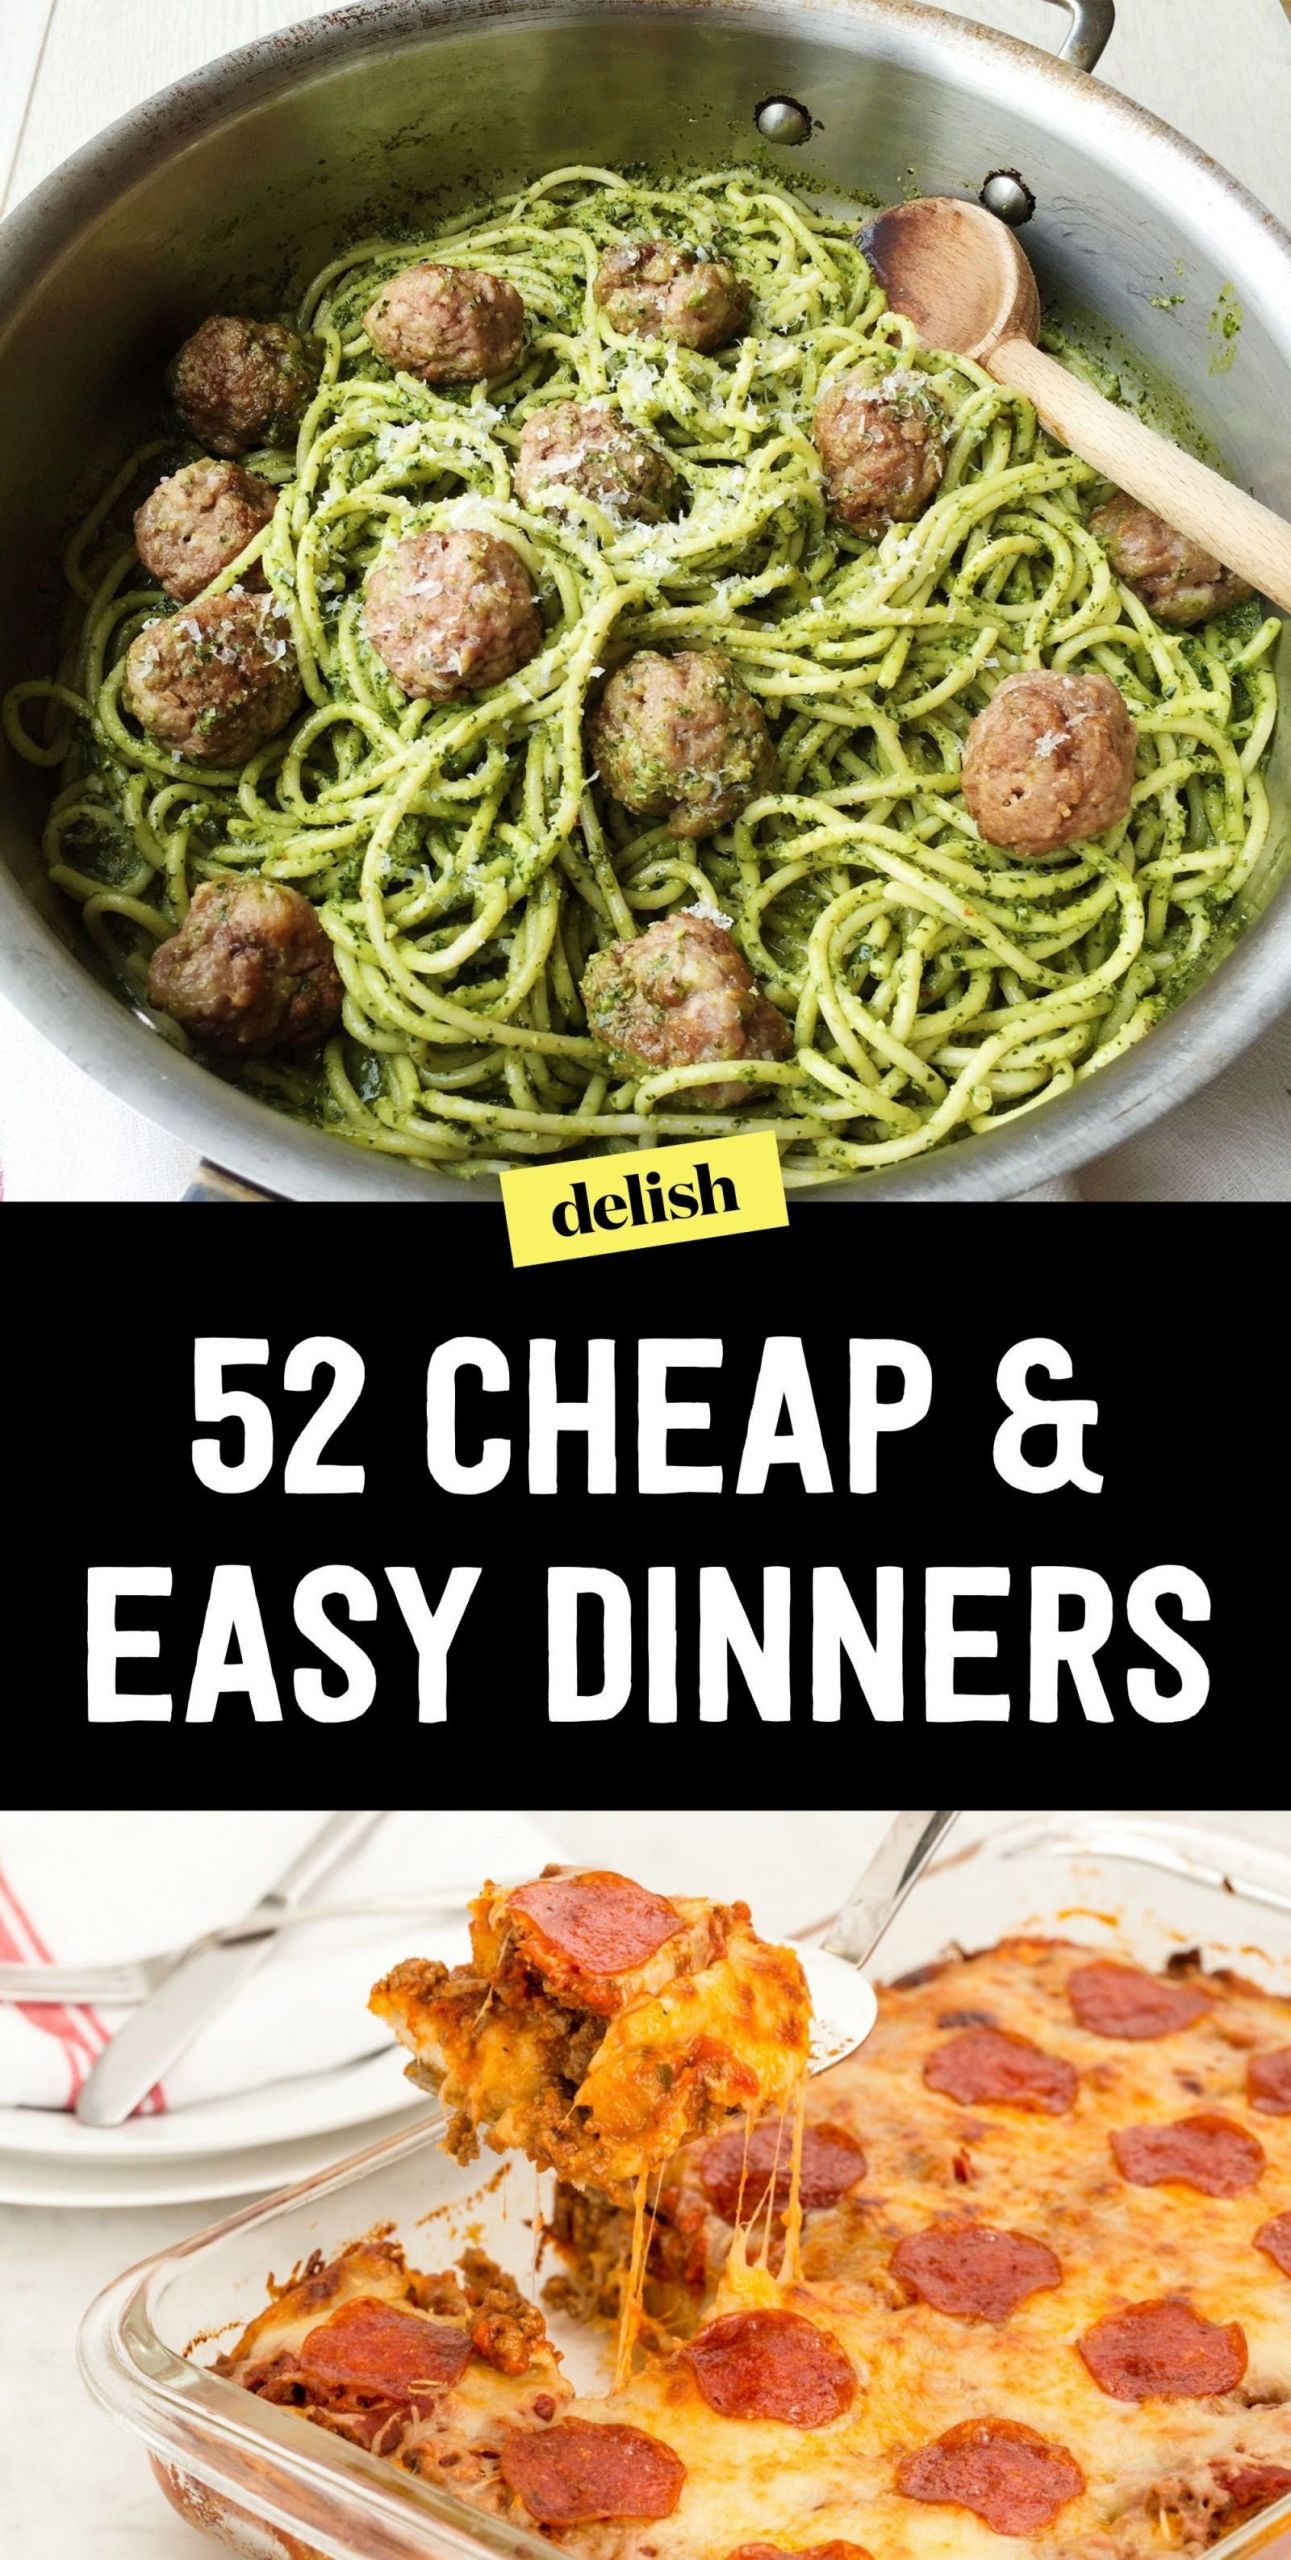 Easy Cheap Dinner Recipes
 10 Great Cheap Meal Ideas For 2 2019